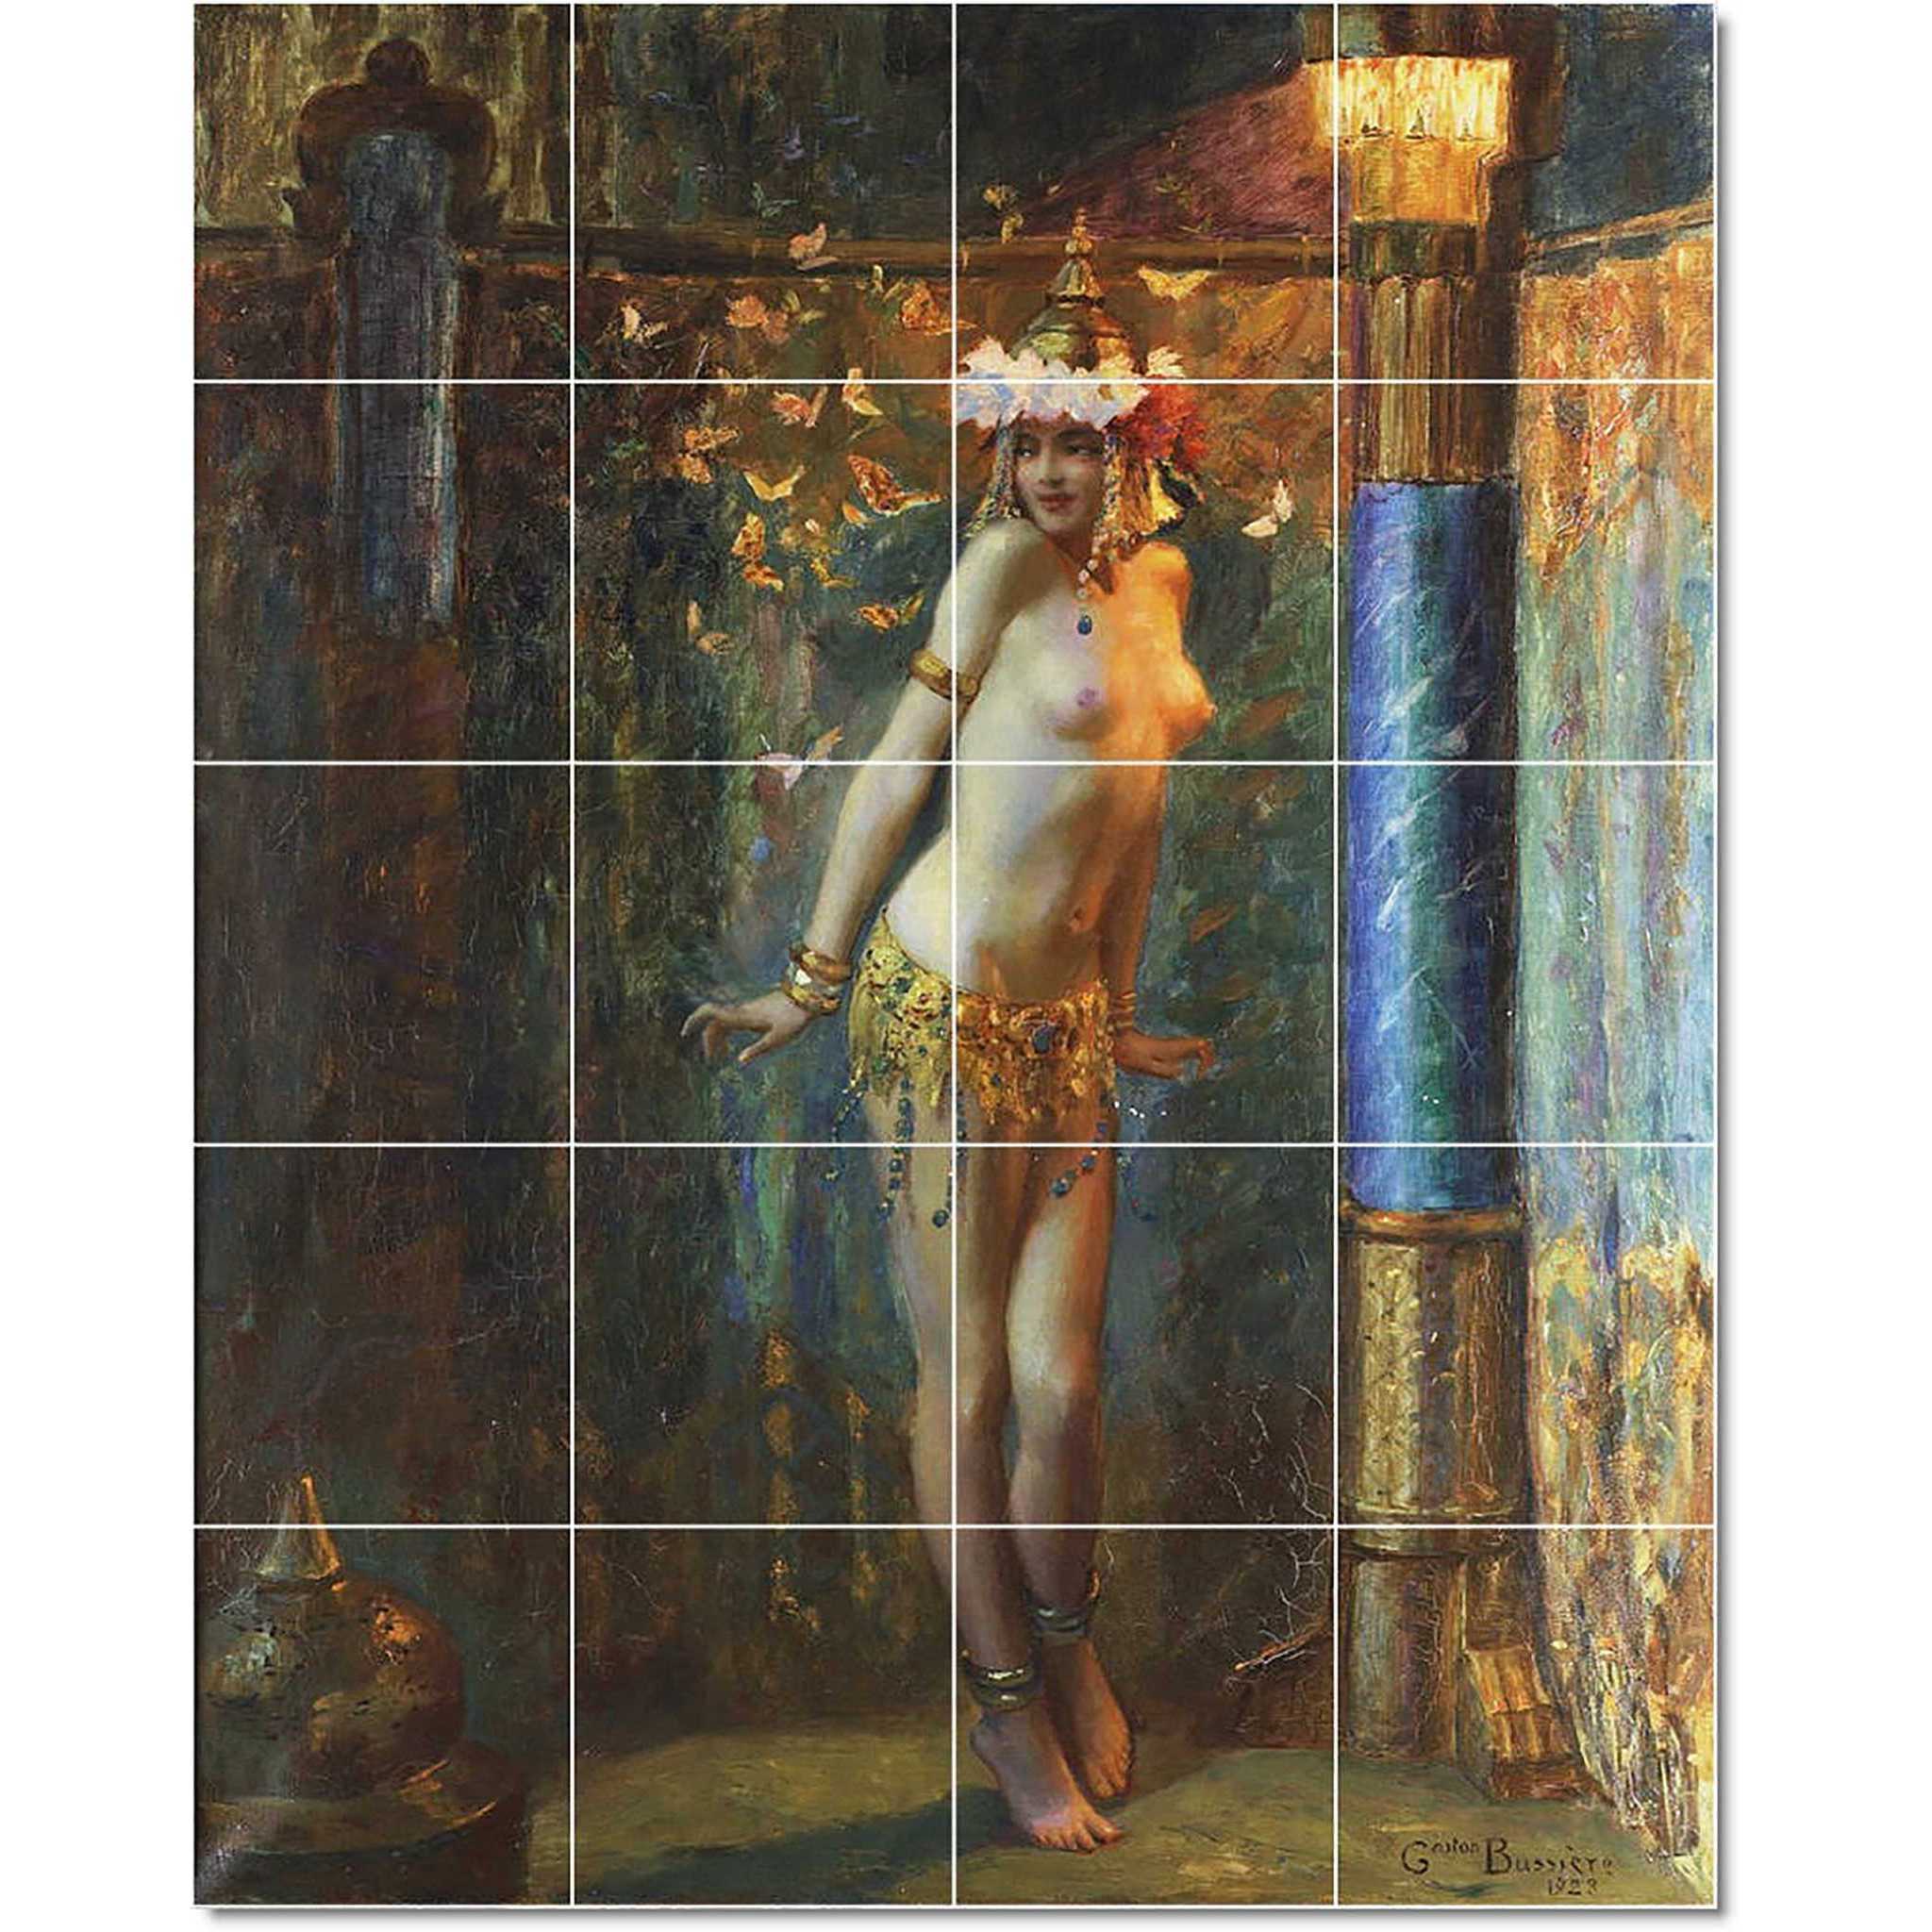 gaston bussiere nude painting ceramic tile mural p22163